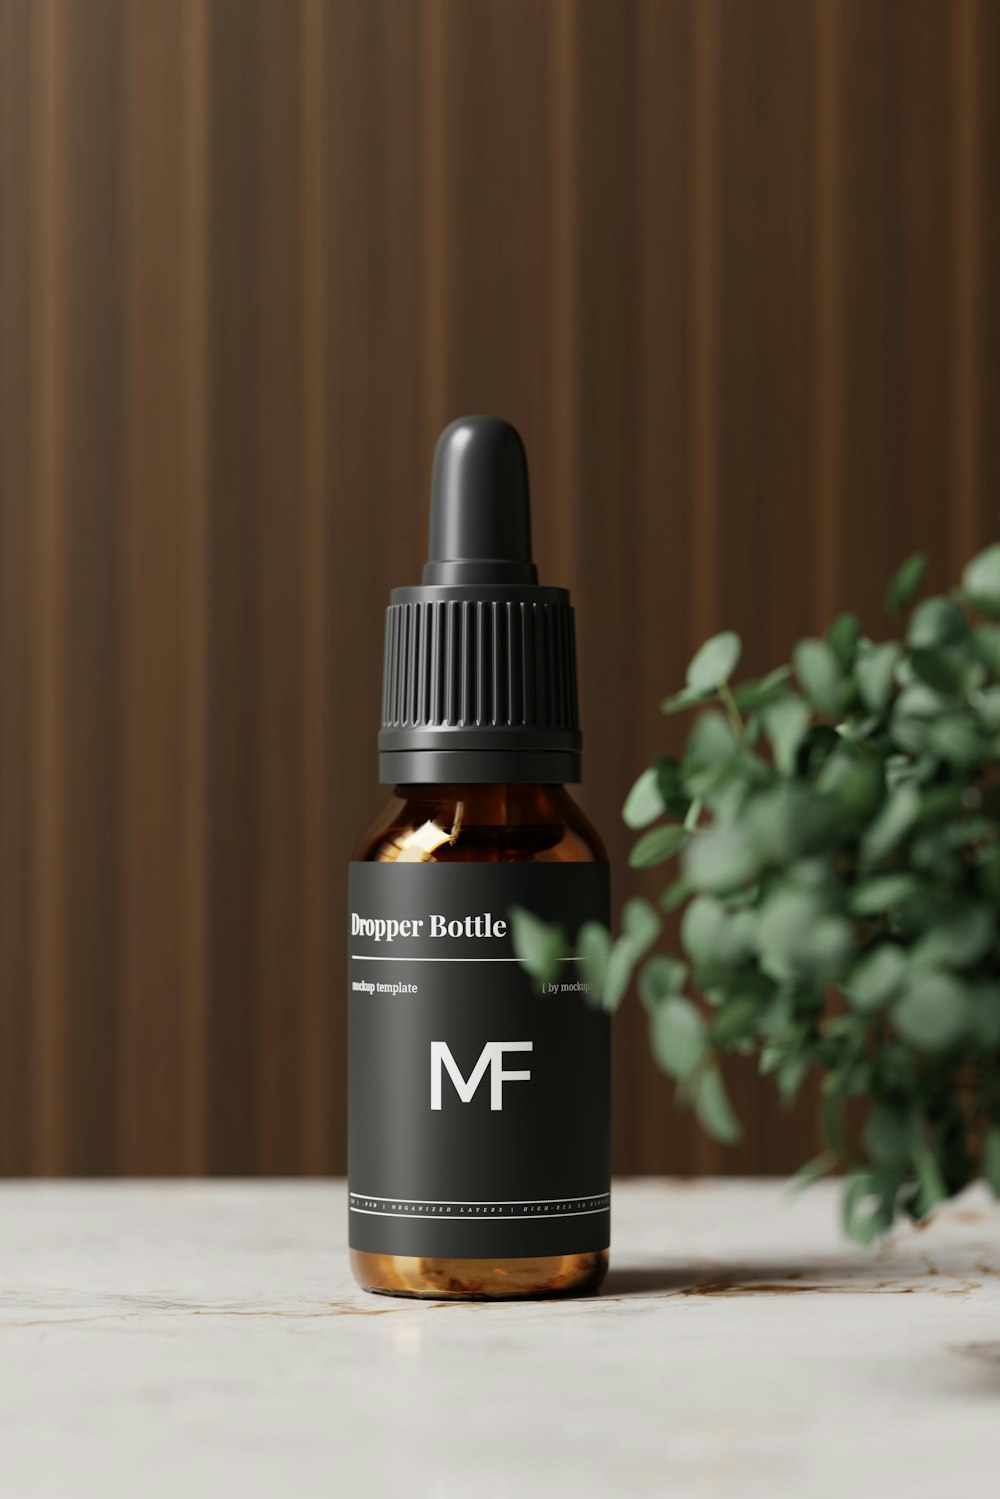 a bottle of mf cologne sitting next to a potted plant